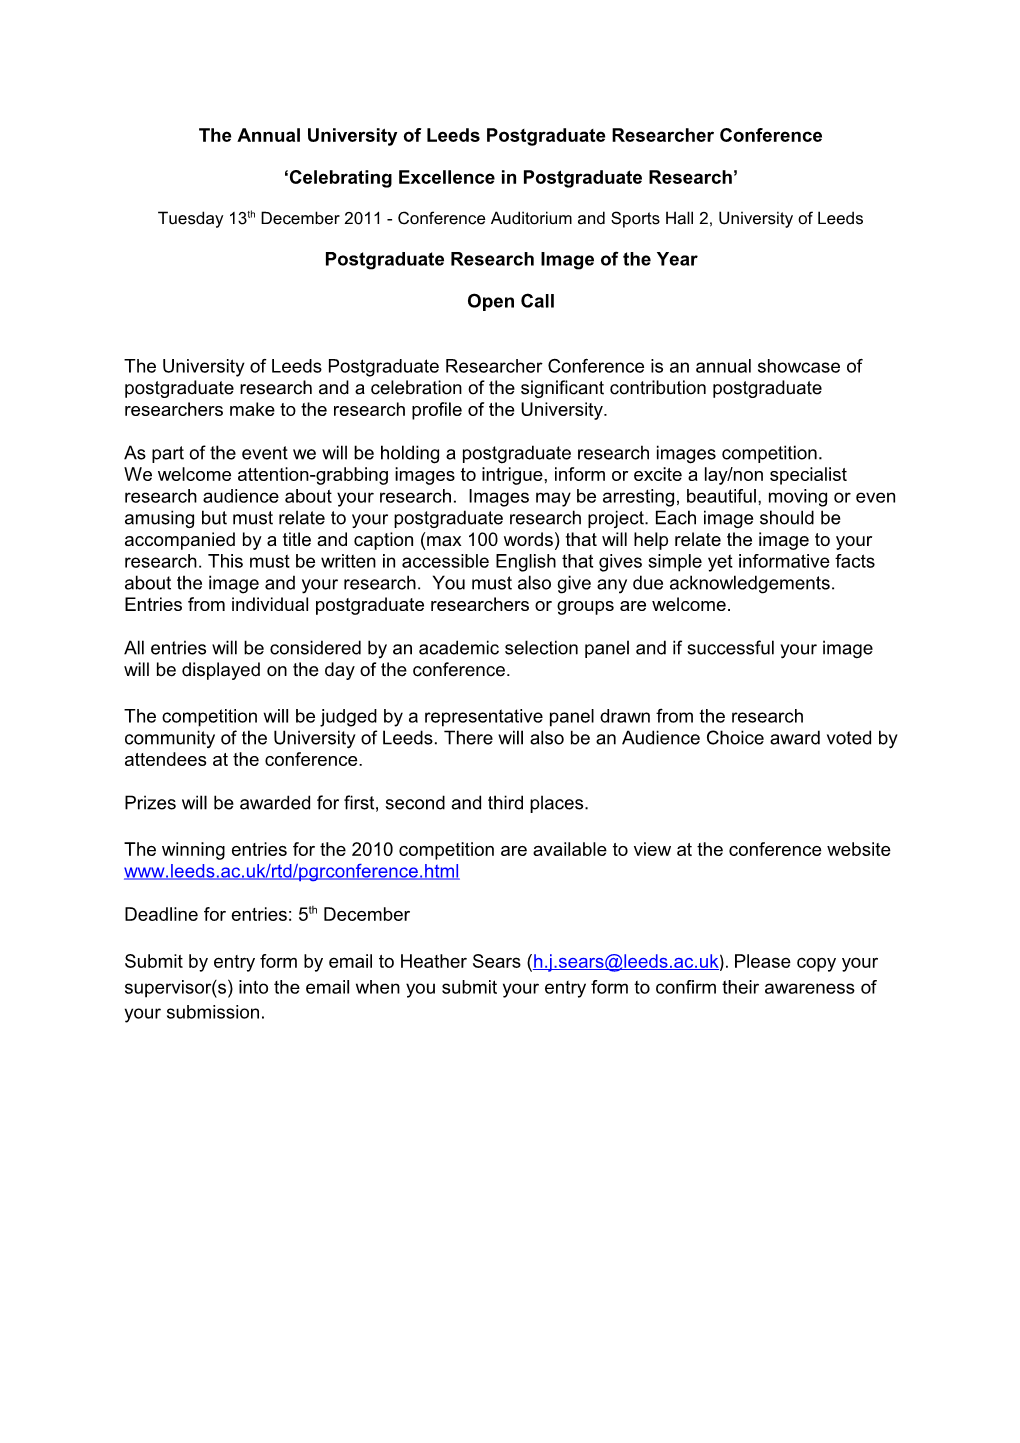 The Annual University of Leeds Postgraduate Researcher Conference